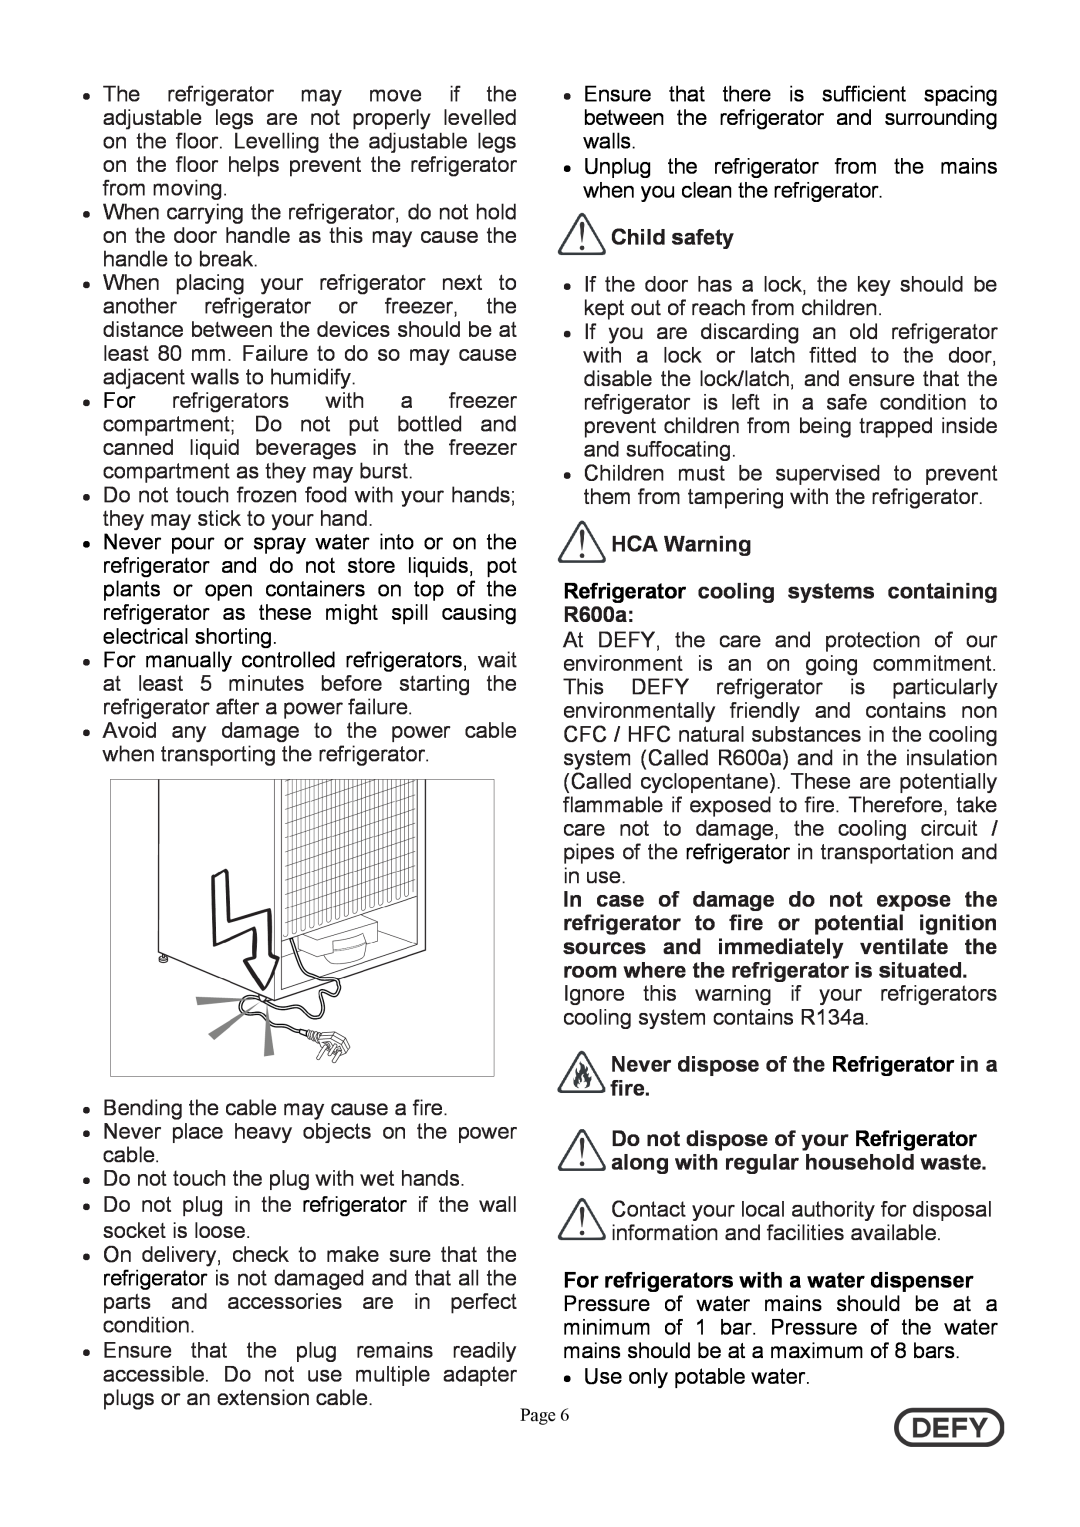 Defy Appliances 5718140000/AA instruction manual Child safety, HCA Warning Refrigerator cooling systems containing R600a 